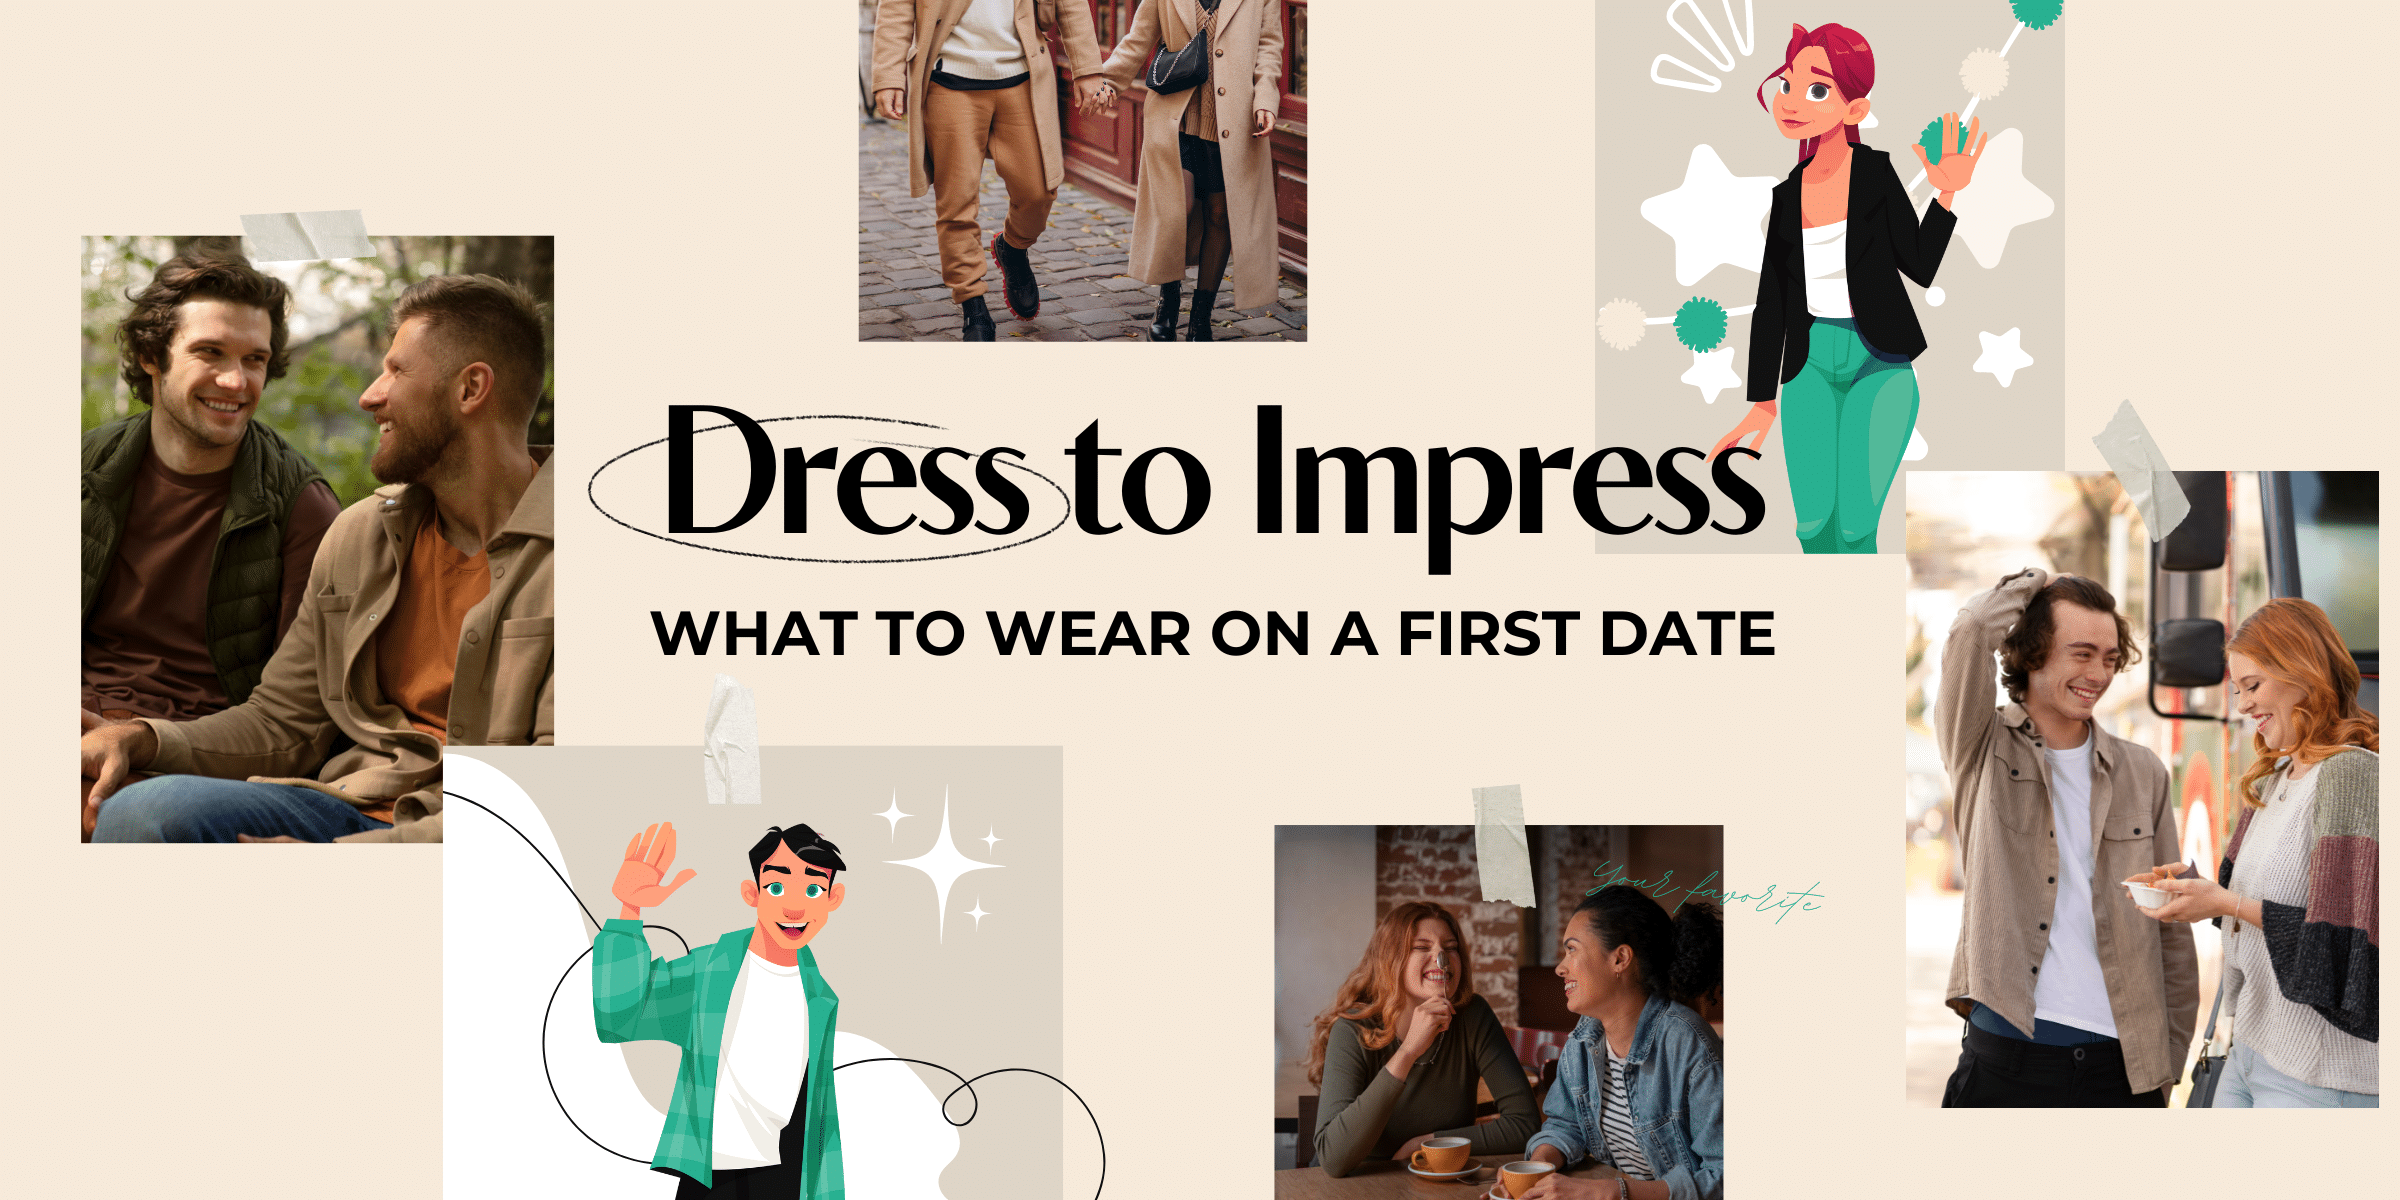 Check out our guide if you’re wondering what to wear on a first date. We have all the best tips to help you make a good first impression!